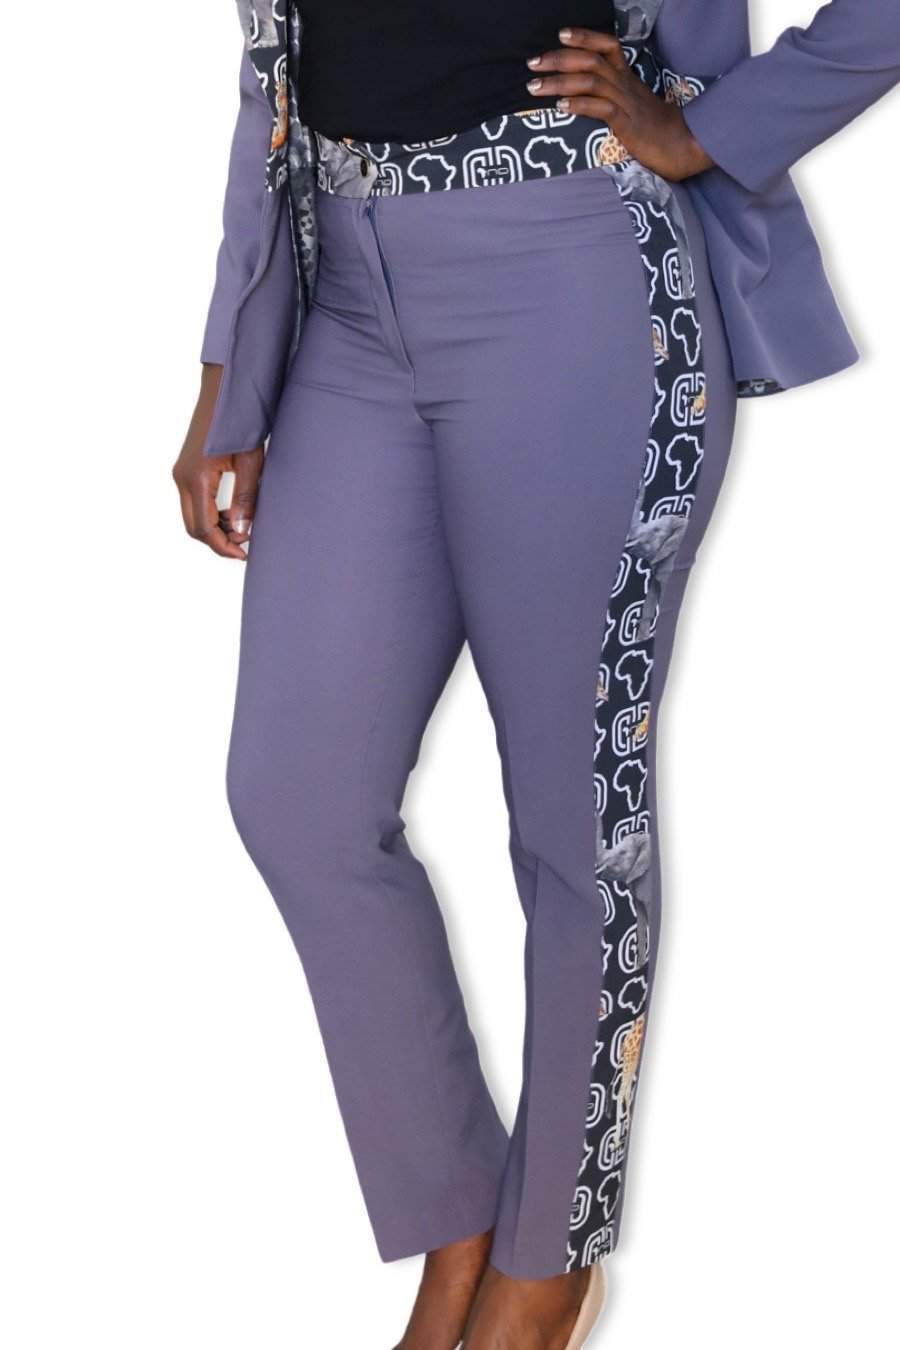 Grey Stylish Office Pants-danddclothing-AFRICAN WEAR FOR WOMEN,Female trousers,Grey,Trousers